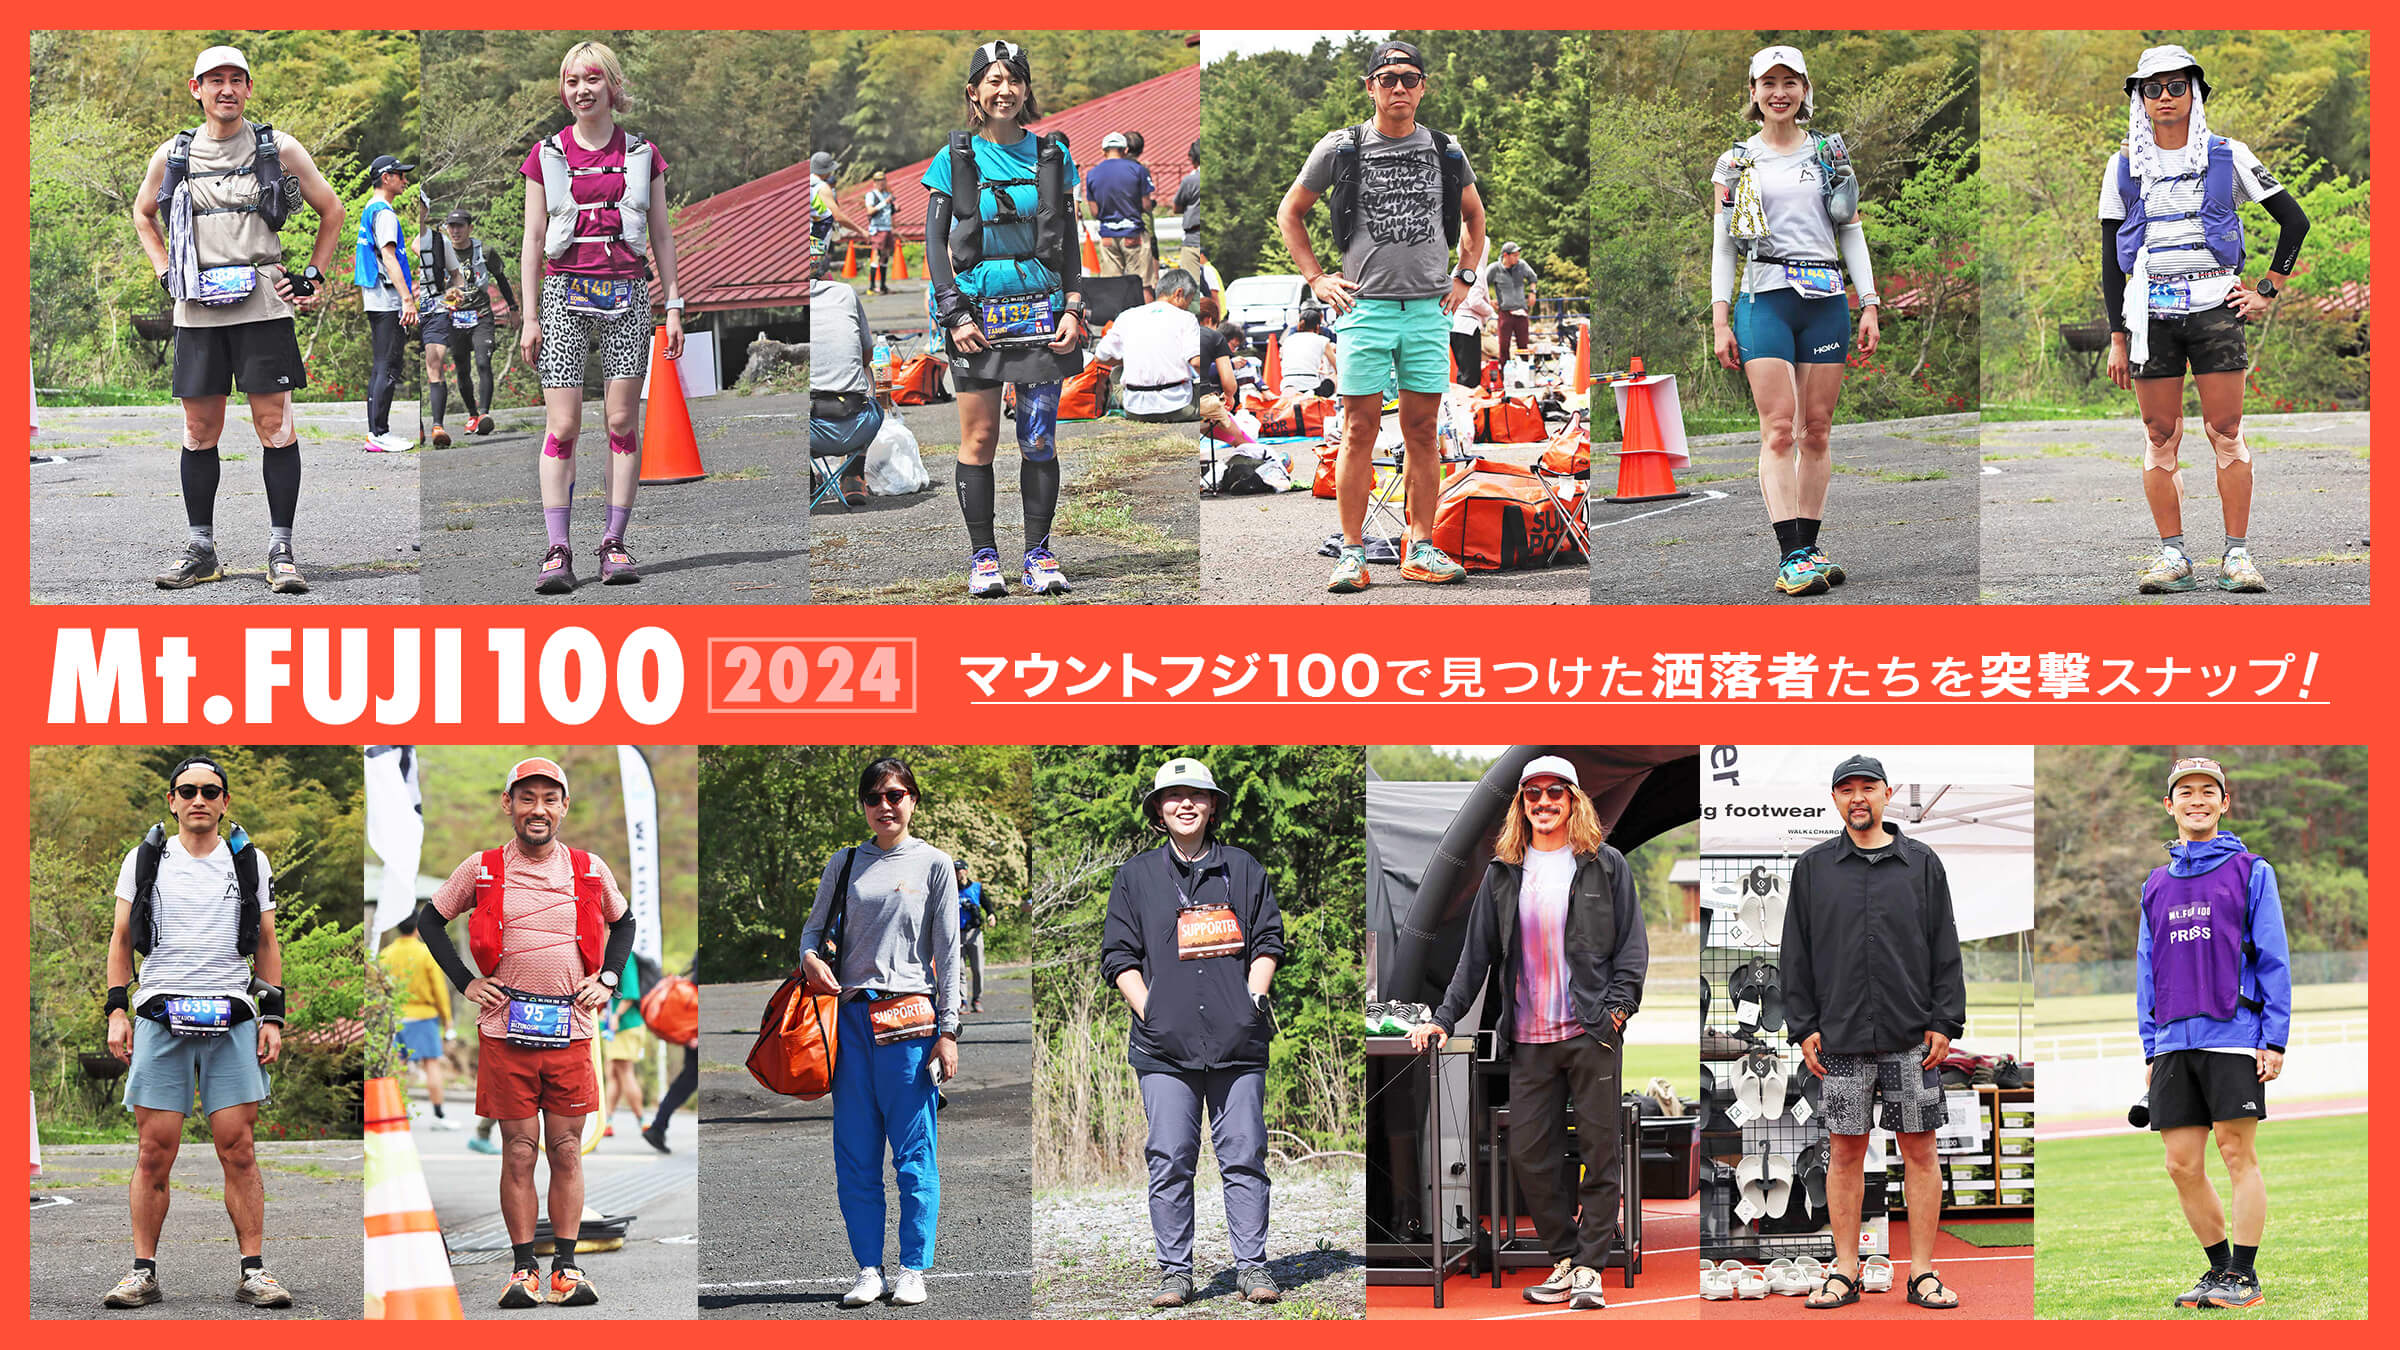 A crash course in the fashionable people found at the Mount Fuji 100!